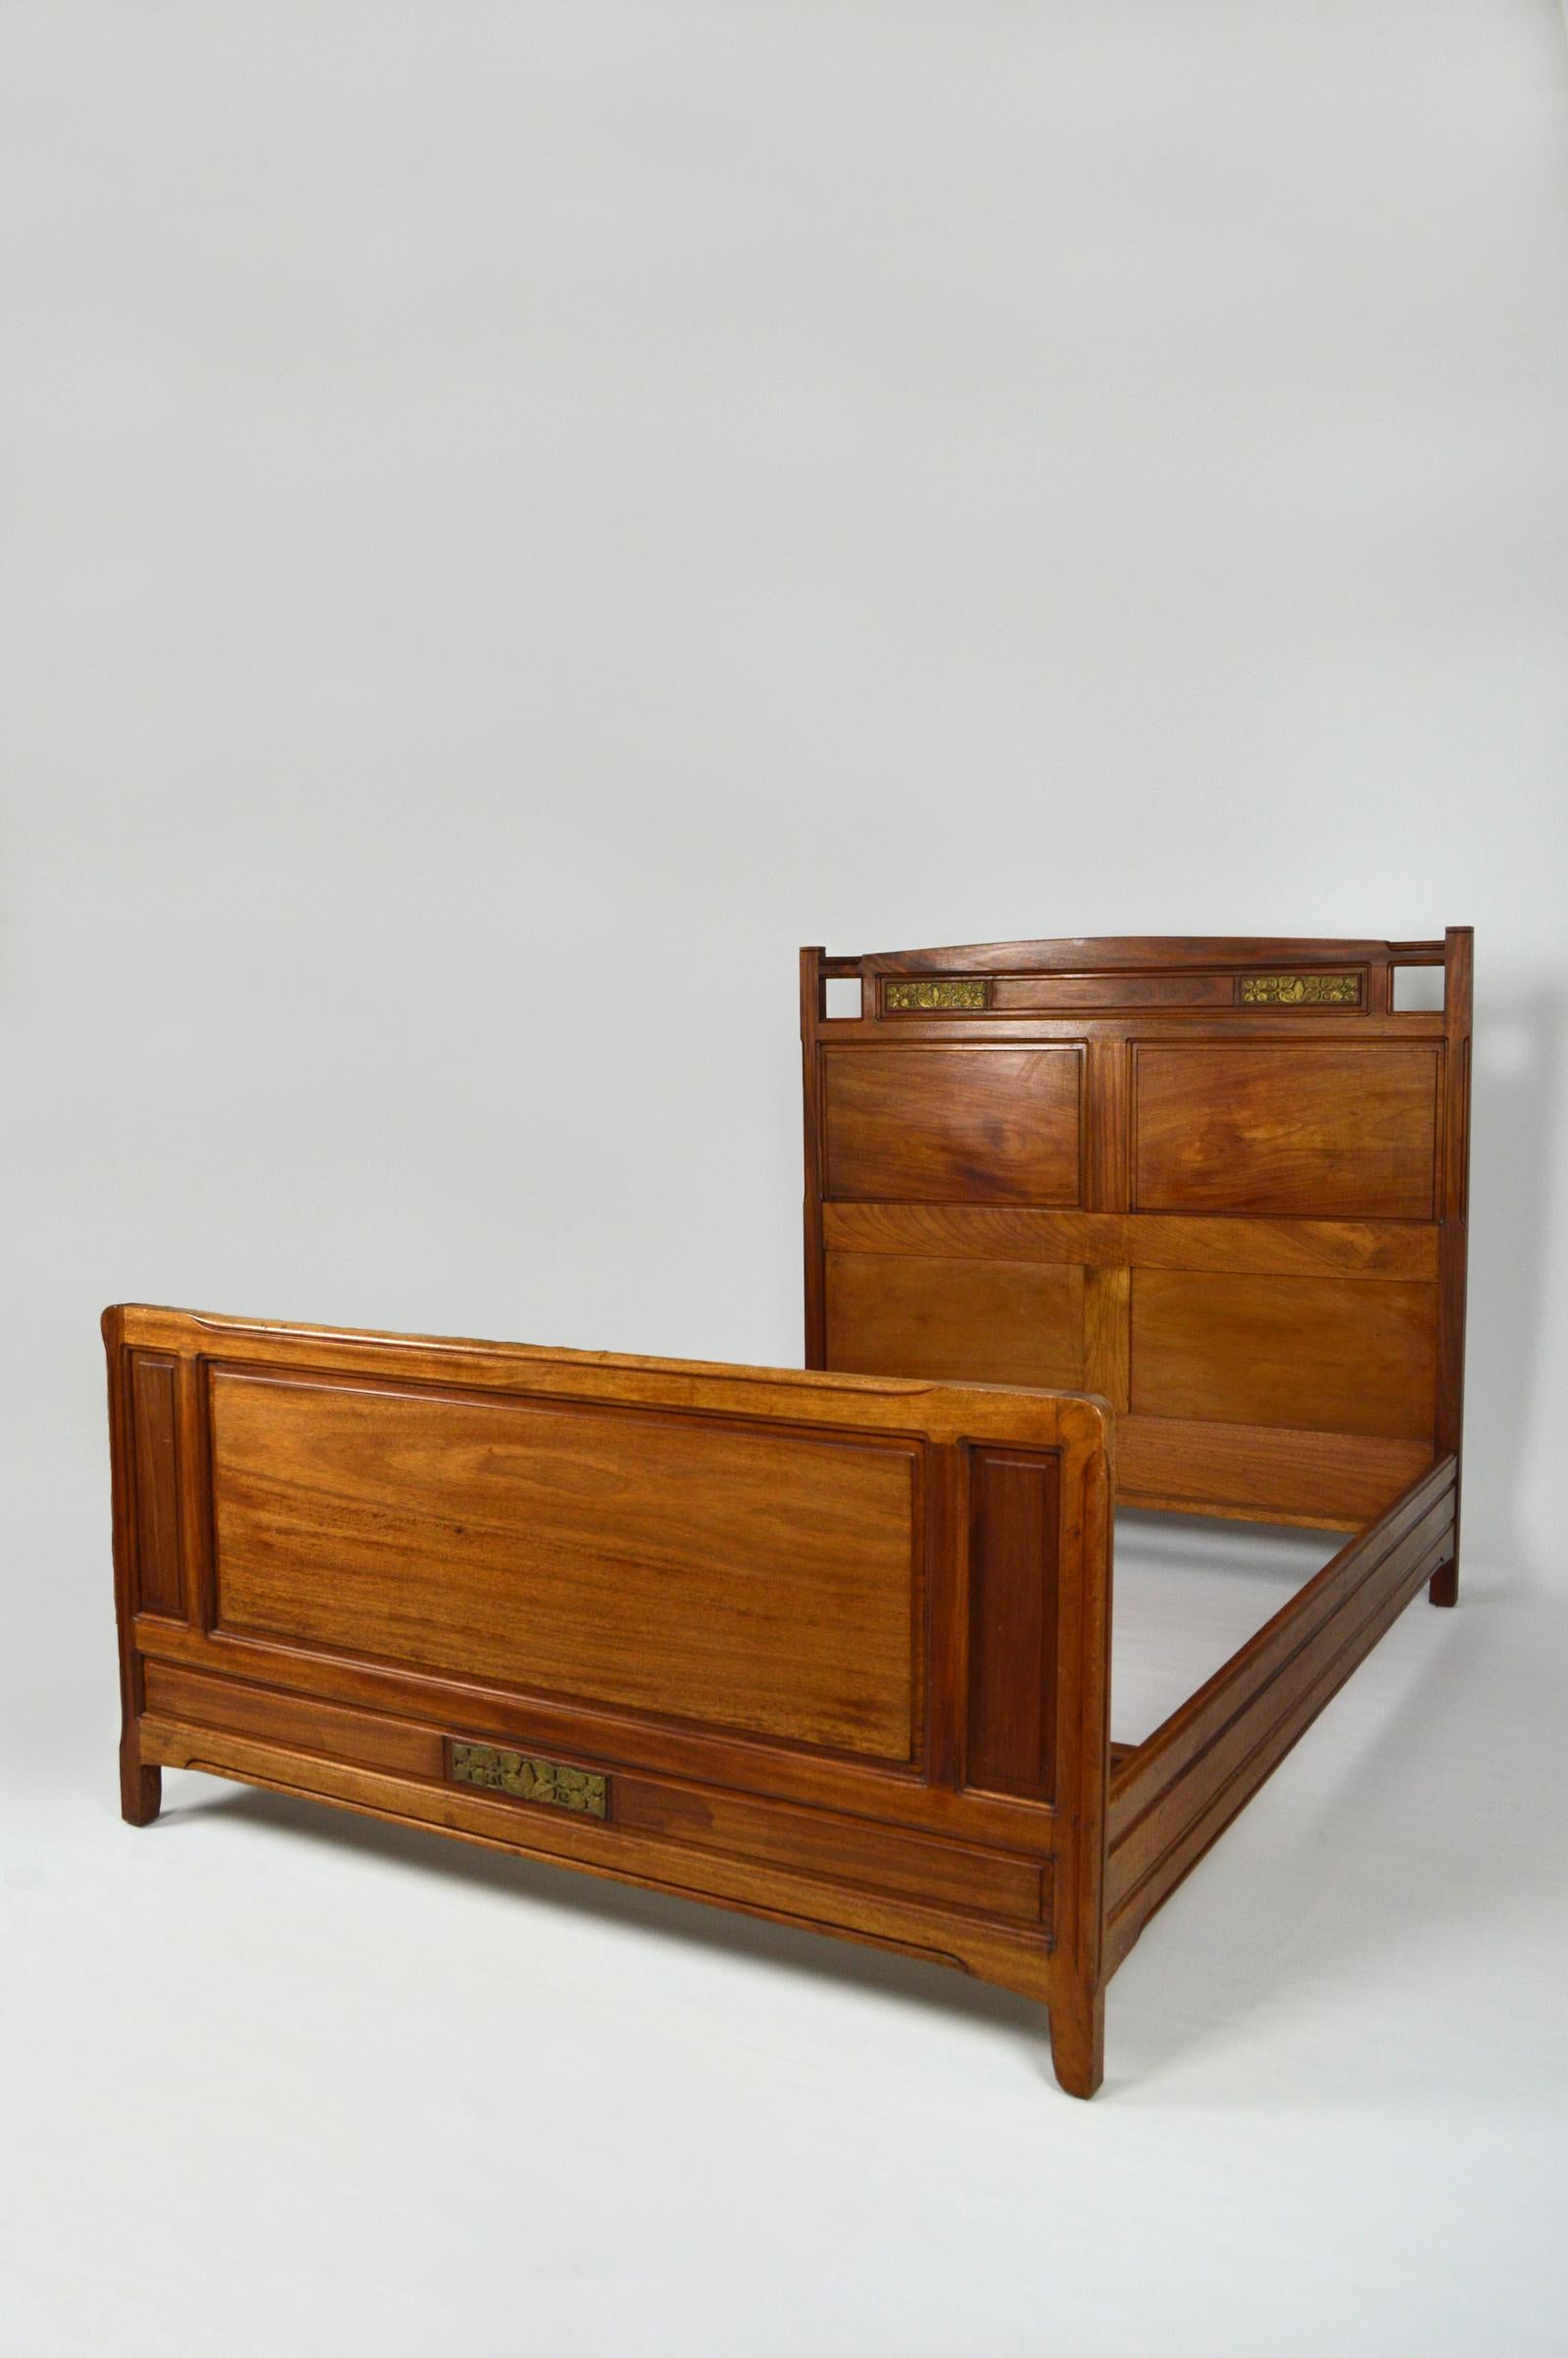 Large mahogany double bed for sleeping 140 x 190 cm, enhanced with beautiful decorative bronzes representing Clematis.

Art Nouveau, France, circa 1920.
By cabinetmaker Mathieu Gallerey (documentation + stamp present).
In good